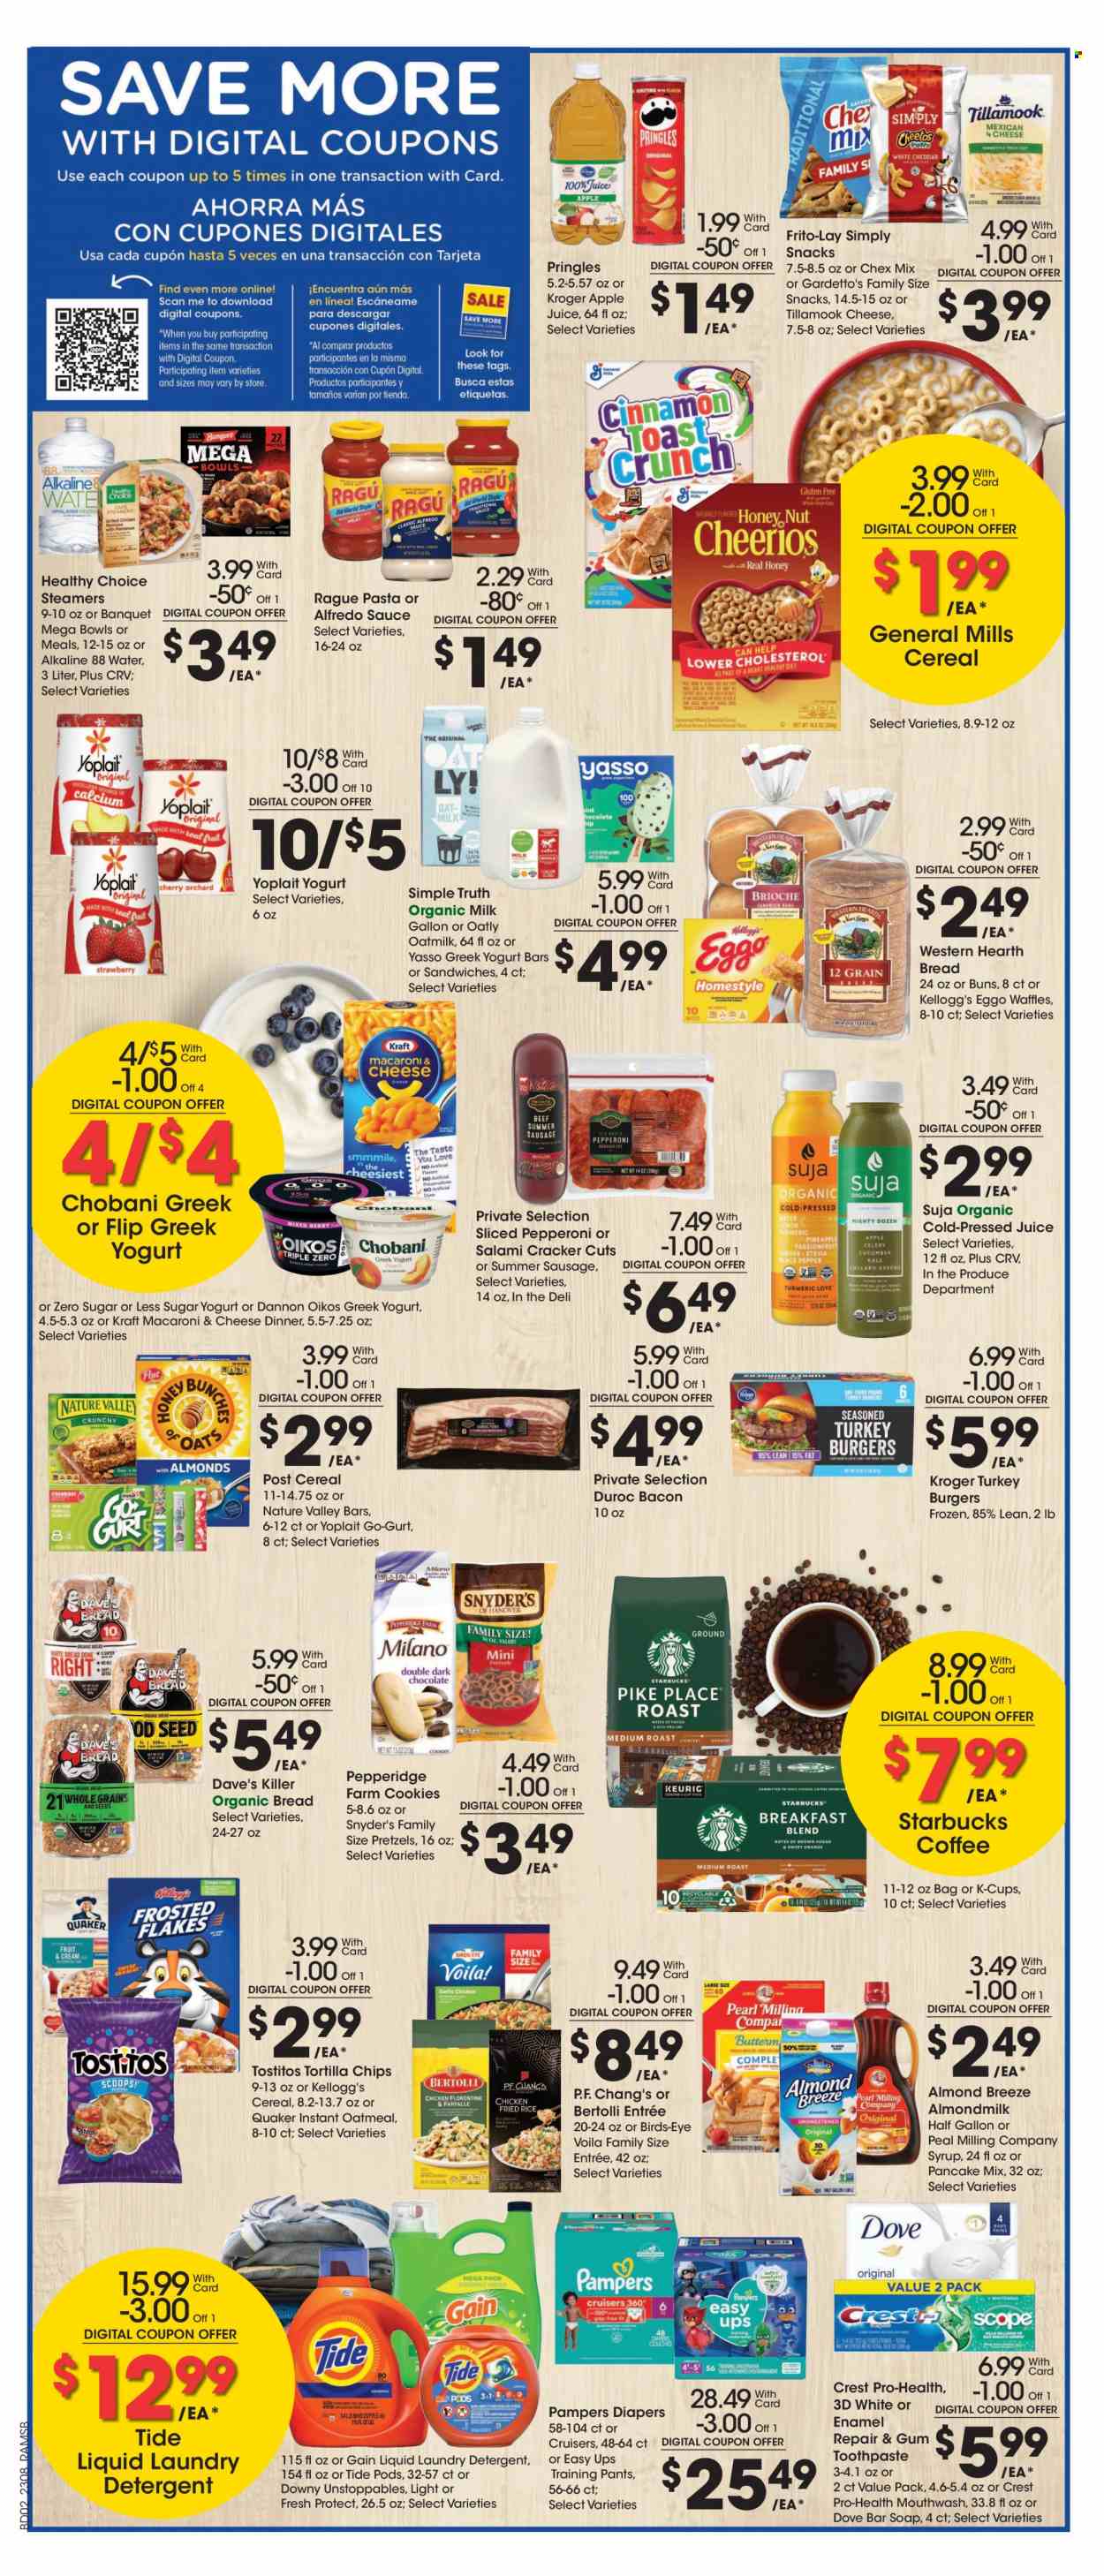 thumbnail - Ralphs Flyer - 03/22/2023 - 03/28/2023 - Sales products - bread, pretzels, buns, brioche, waffles, macaroni & cheese, sandwich, hamburger, sauce, pancakes, Quaker, Alfredo sauce, Healthy Choice, Kraft®, Bertolli, roast, bacon, salami, sausage, summer sausage, pepperoni, greek yoghurt, Oikos, Yoplait, Chobani, Dannon, almond milk, organic milk, Almond Breeze, oat milk, cookies, Dove, chocolate, snack, crackers, Kellogg's, dark chocolate, tortilla chips, Pringles, Cheetos, Frito-Lay, Tostitos, Chex Mix, oatmeal, oats, cereals, Cheerios, Frosted Flakes, Nature Valley, cinnamon, ragu, syrup, apple juice, juice, water, coffee, Starbucks, coffee capsules, K-Cups, breakfast blend, chicken, turkey burger, Pampers, pants, nappies, baby pants, detergent, Gain, Tide, laundry detergent, soap bar, soap, toothpaste, mouthwash, Crest, calcium. Page 4.